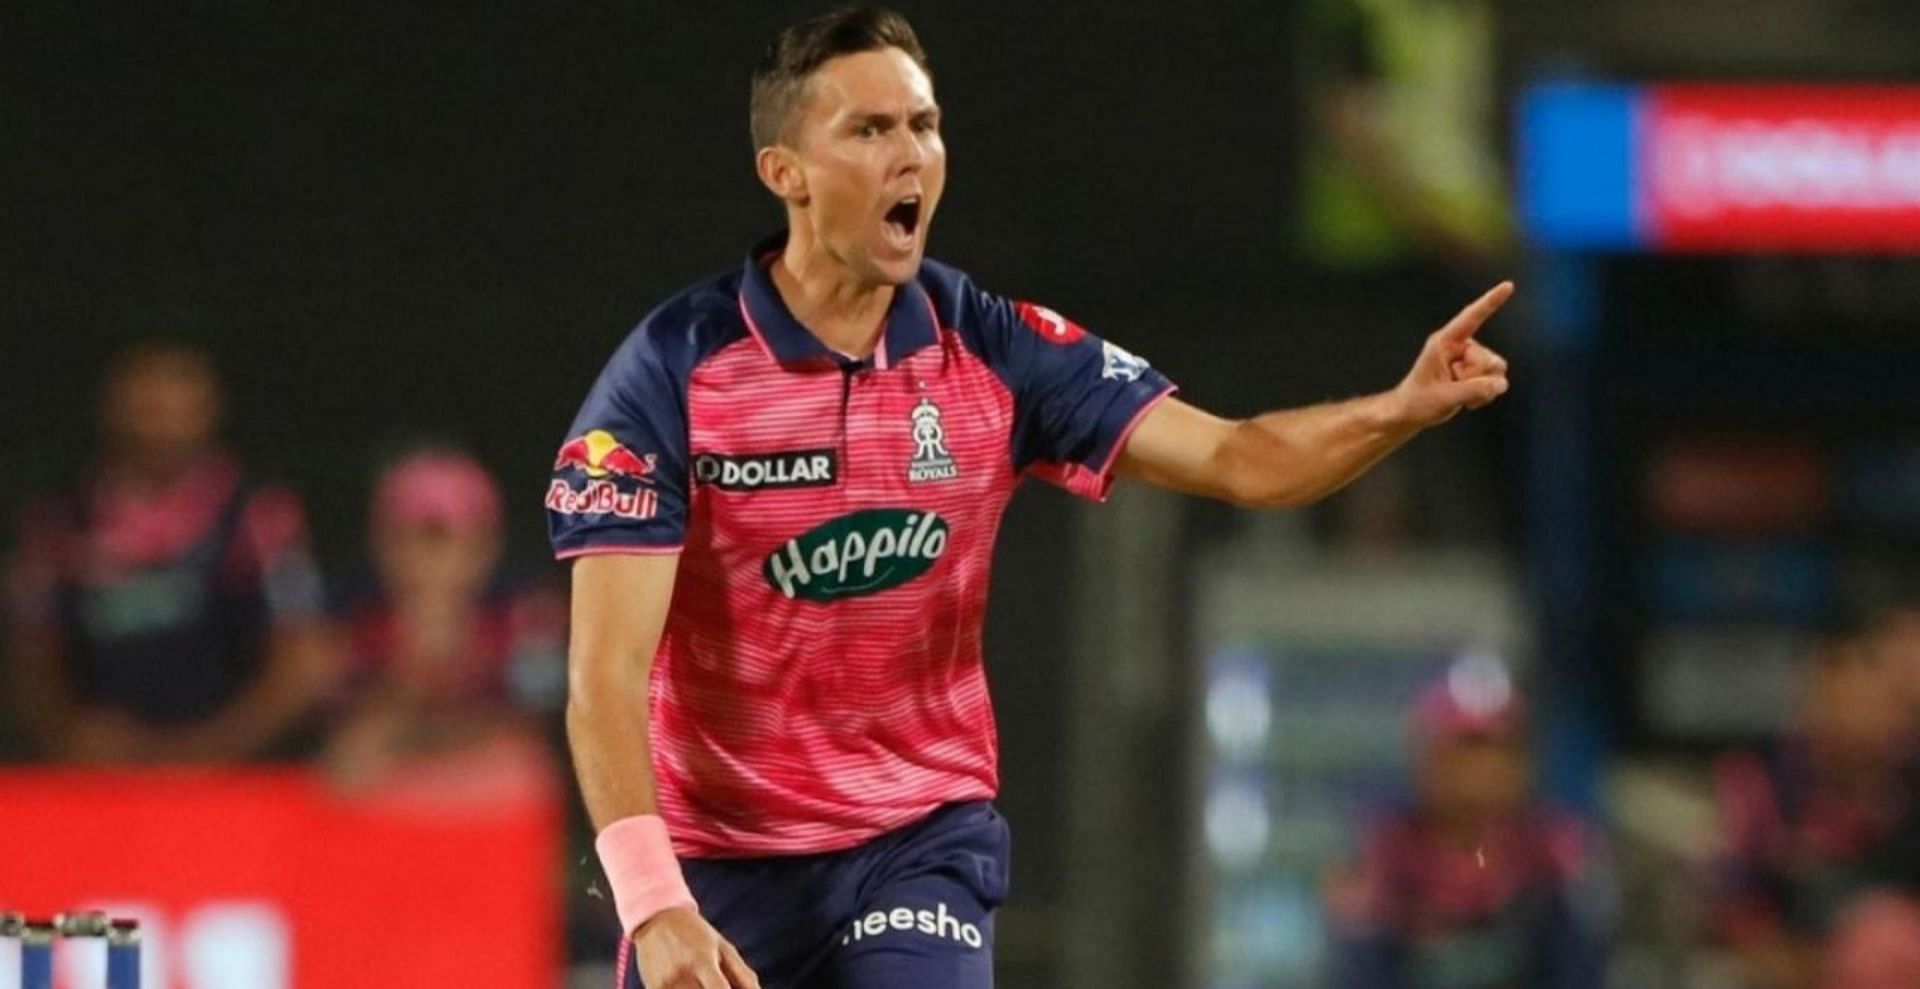 3 reasons why Trent Boult should not be part of RR's playing XI in IPL 2023